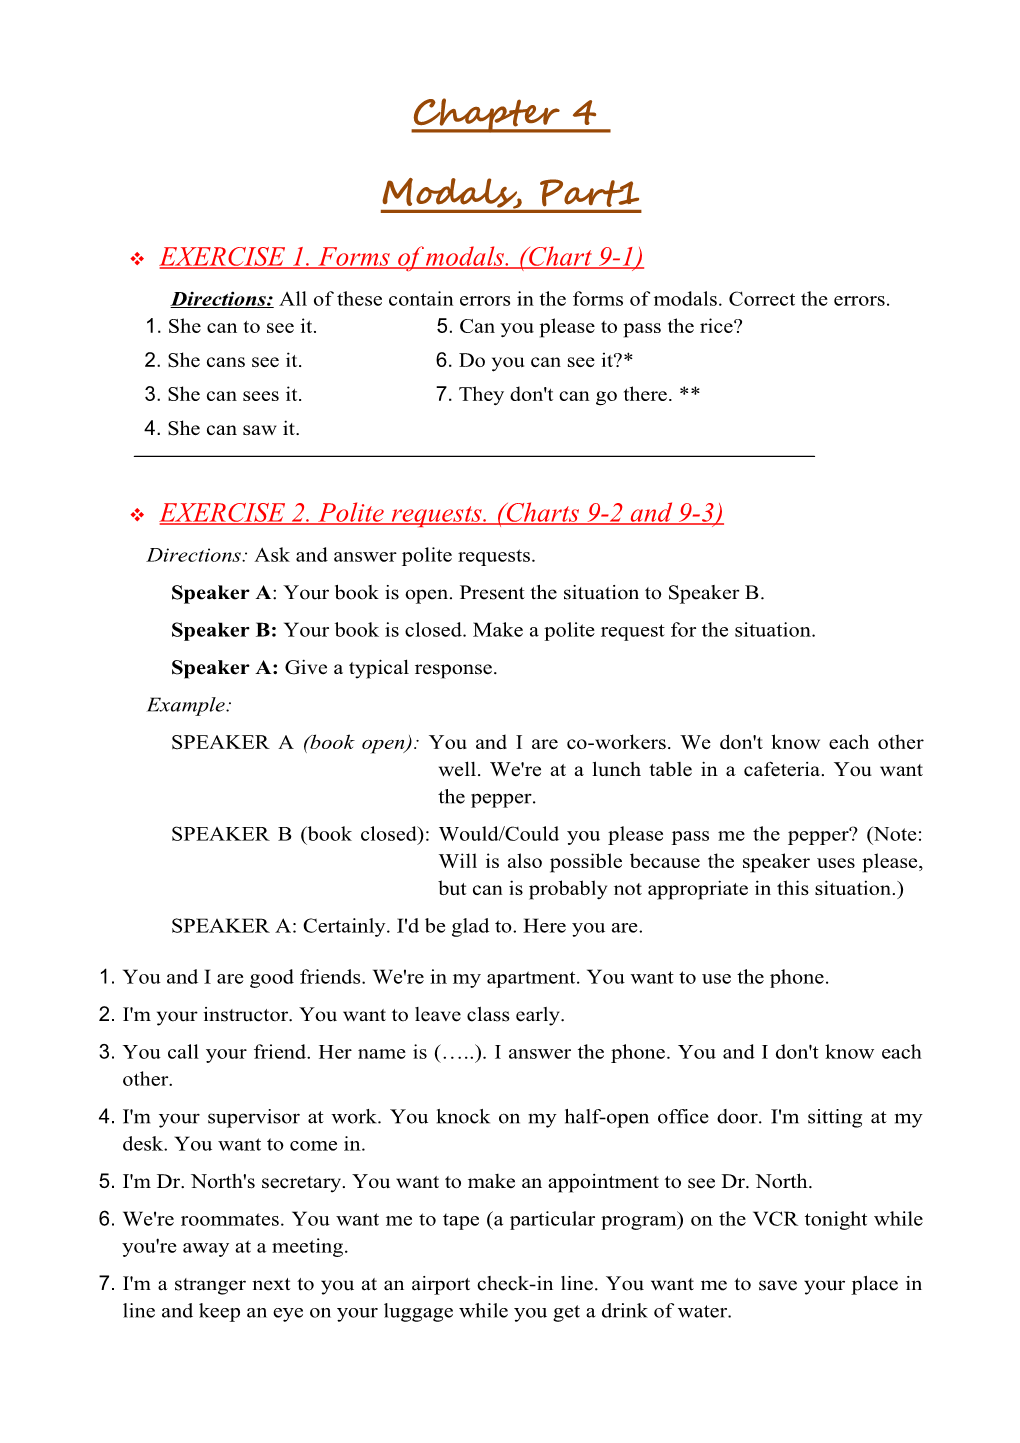 EXERCISE 1. Forms of Modals. (Chart 9-1)